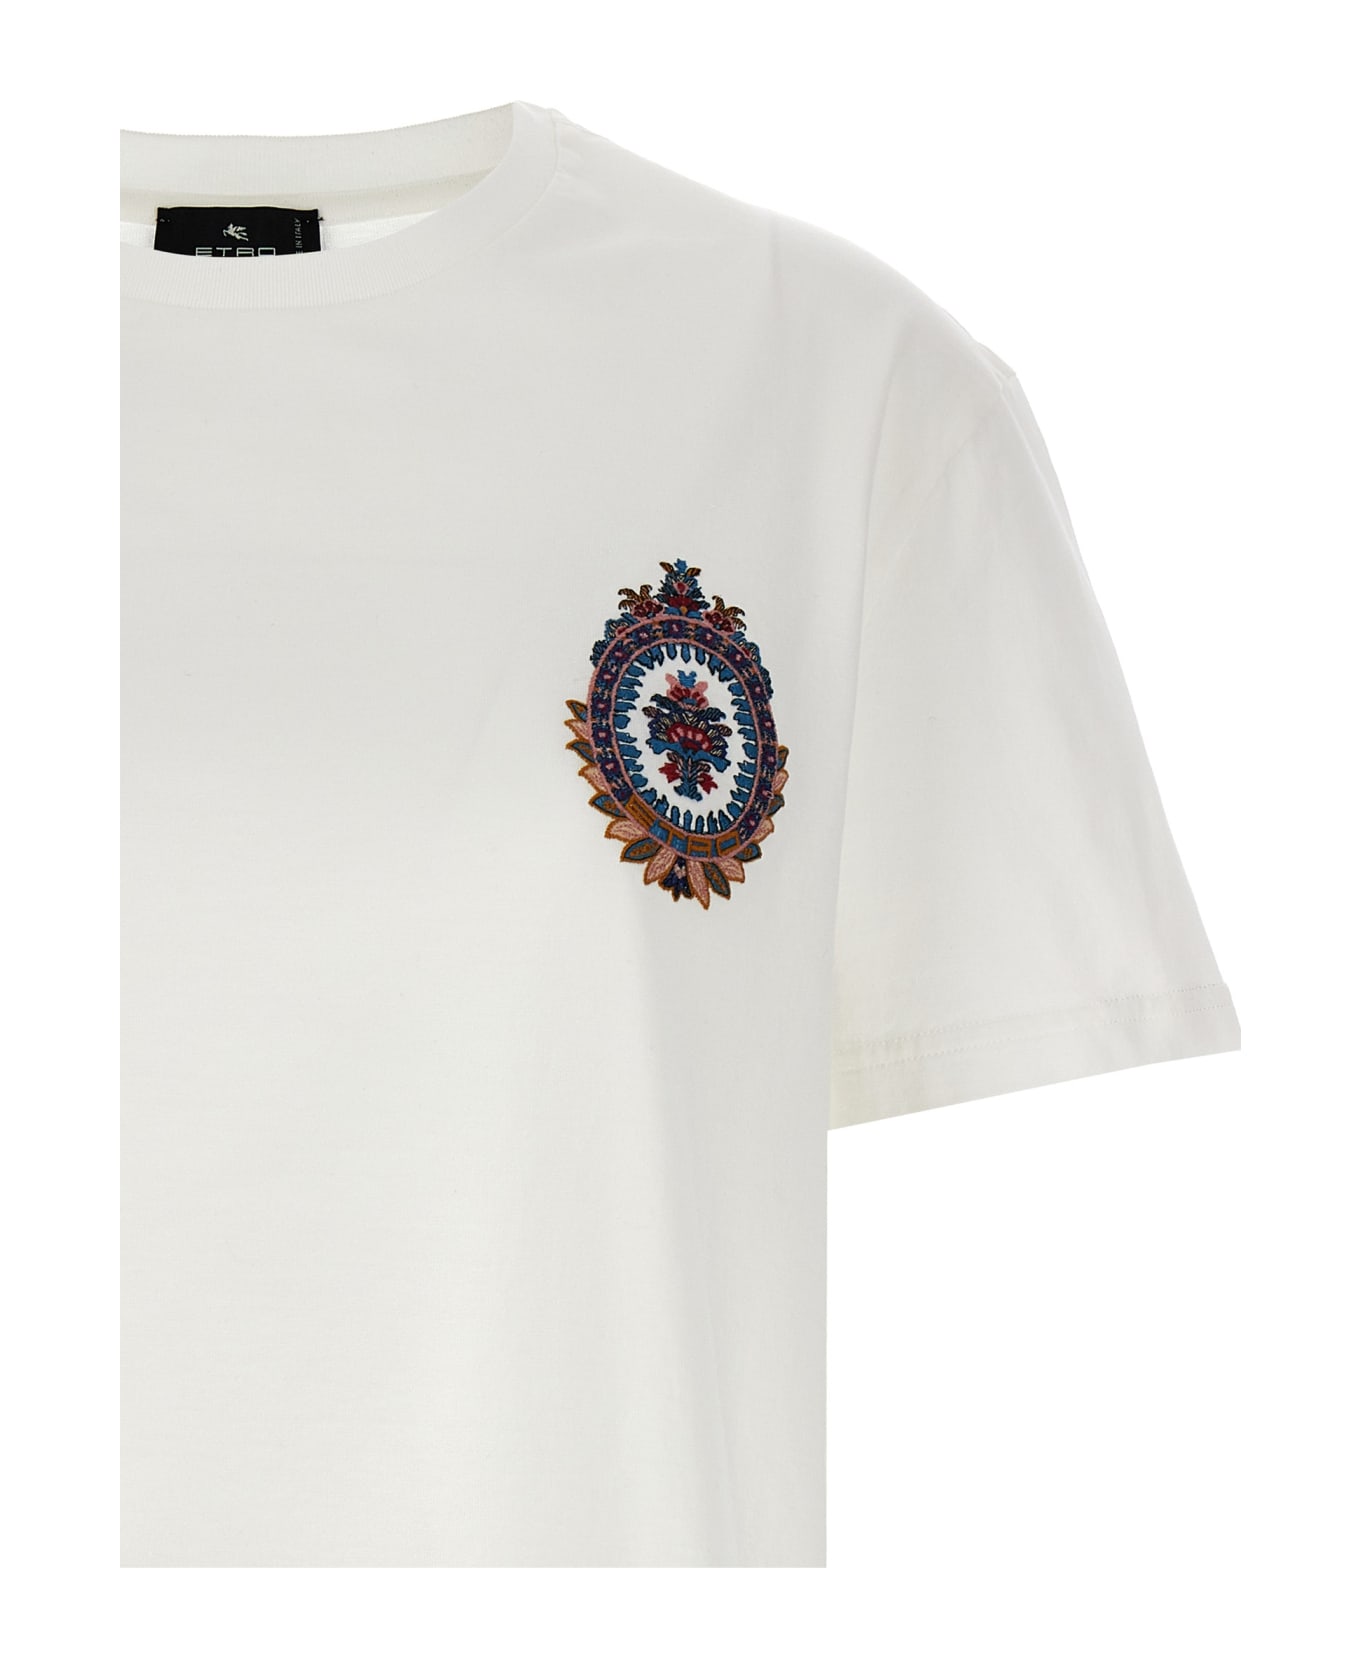 Etro Embroidery T-shirt - White Tシャツ